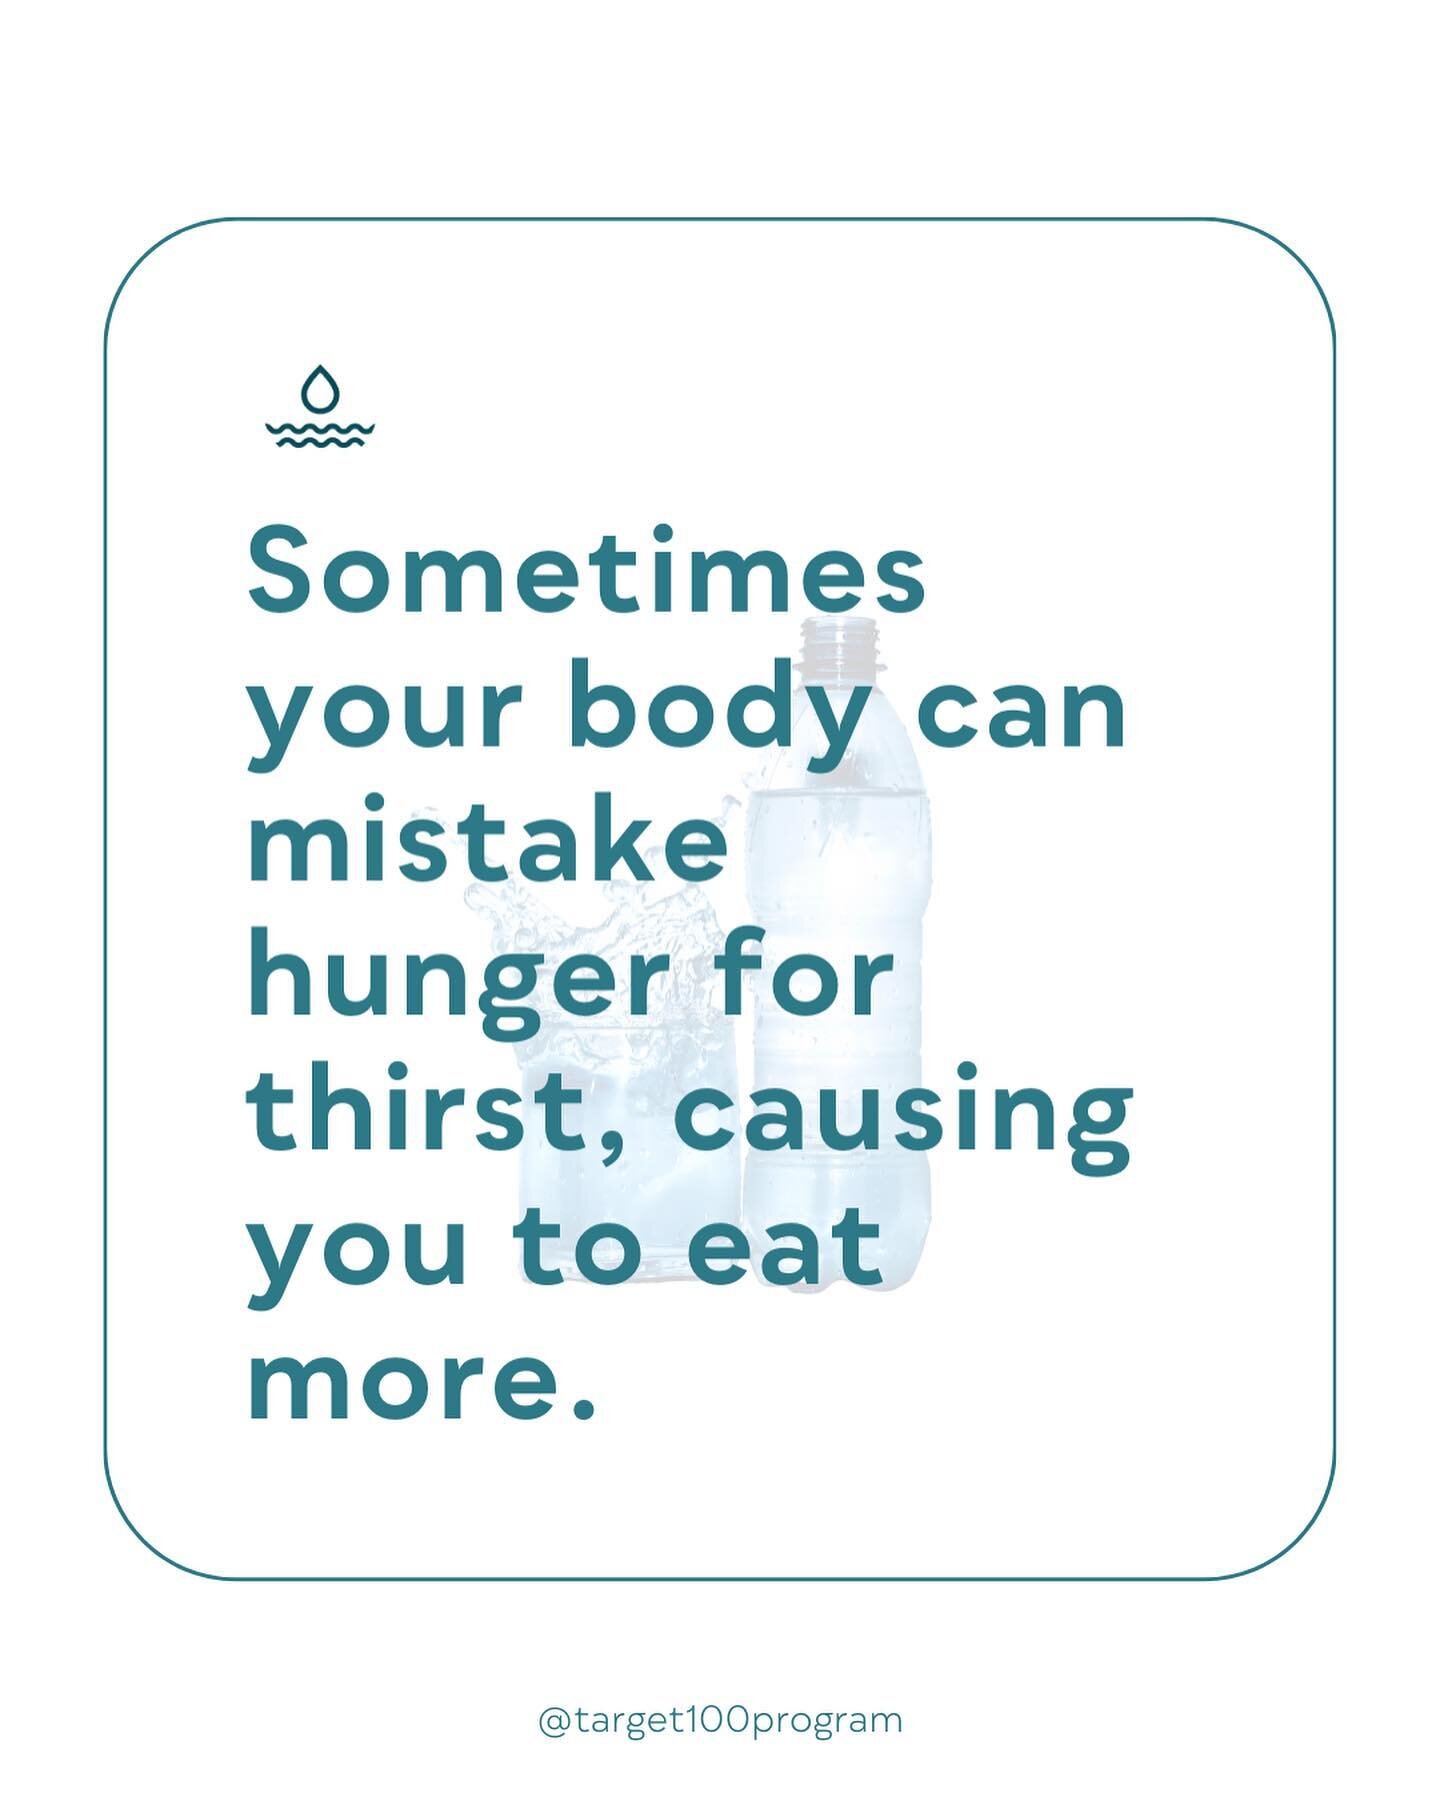 As someone passionate about helping others achieve their weight loss goals, I can&rsquo;t stress enough the importance of staying hydrated. Drinking water before meals can help you feel fuller and reduce the likelihood of overeating. Plus, proper hyd